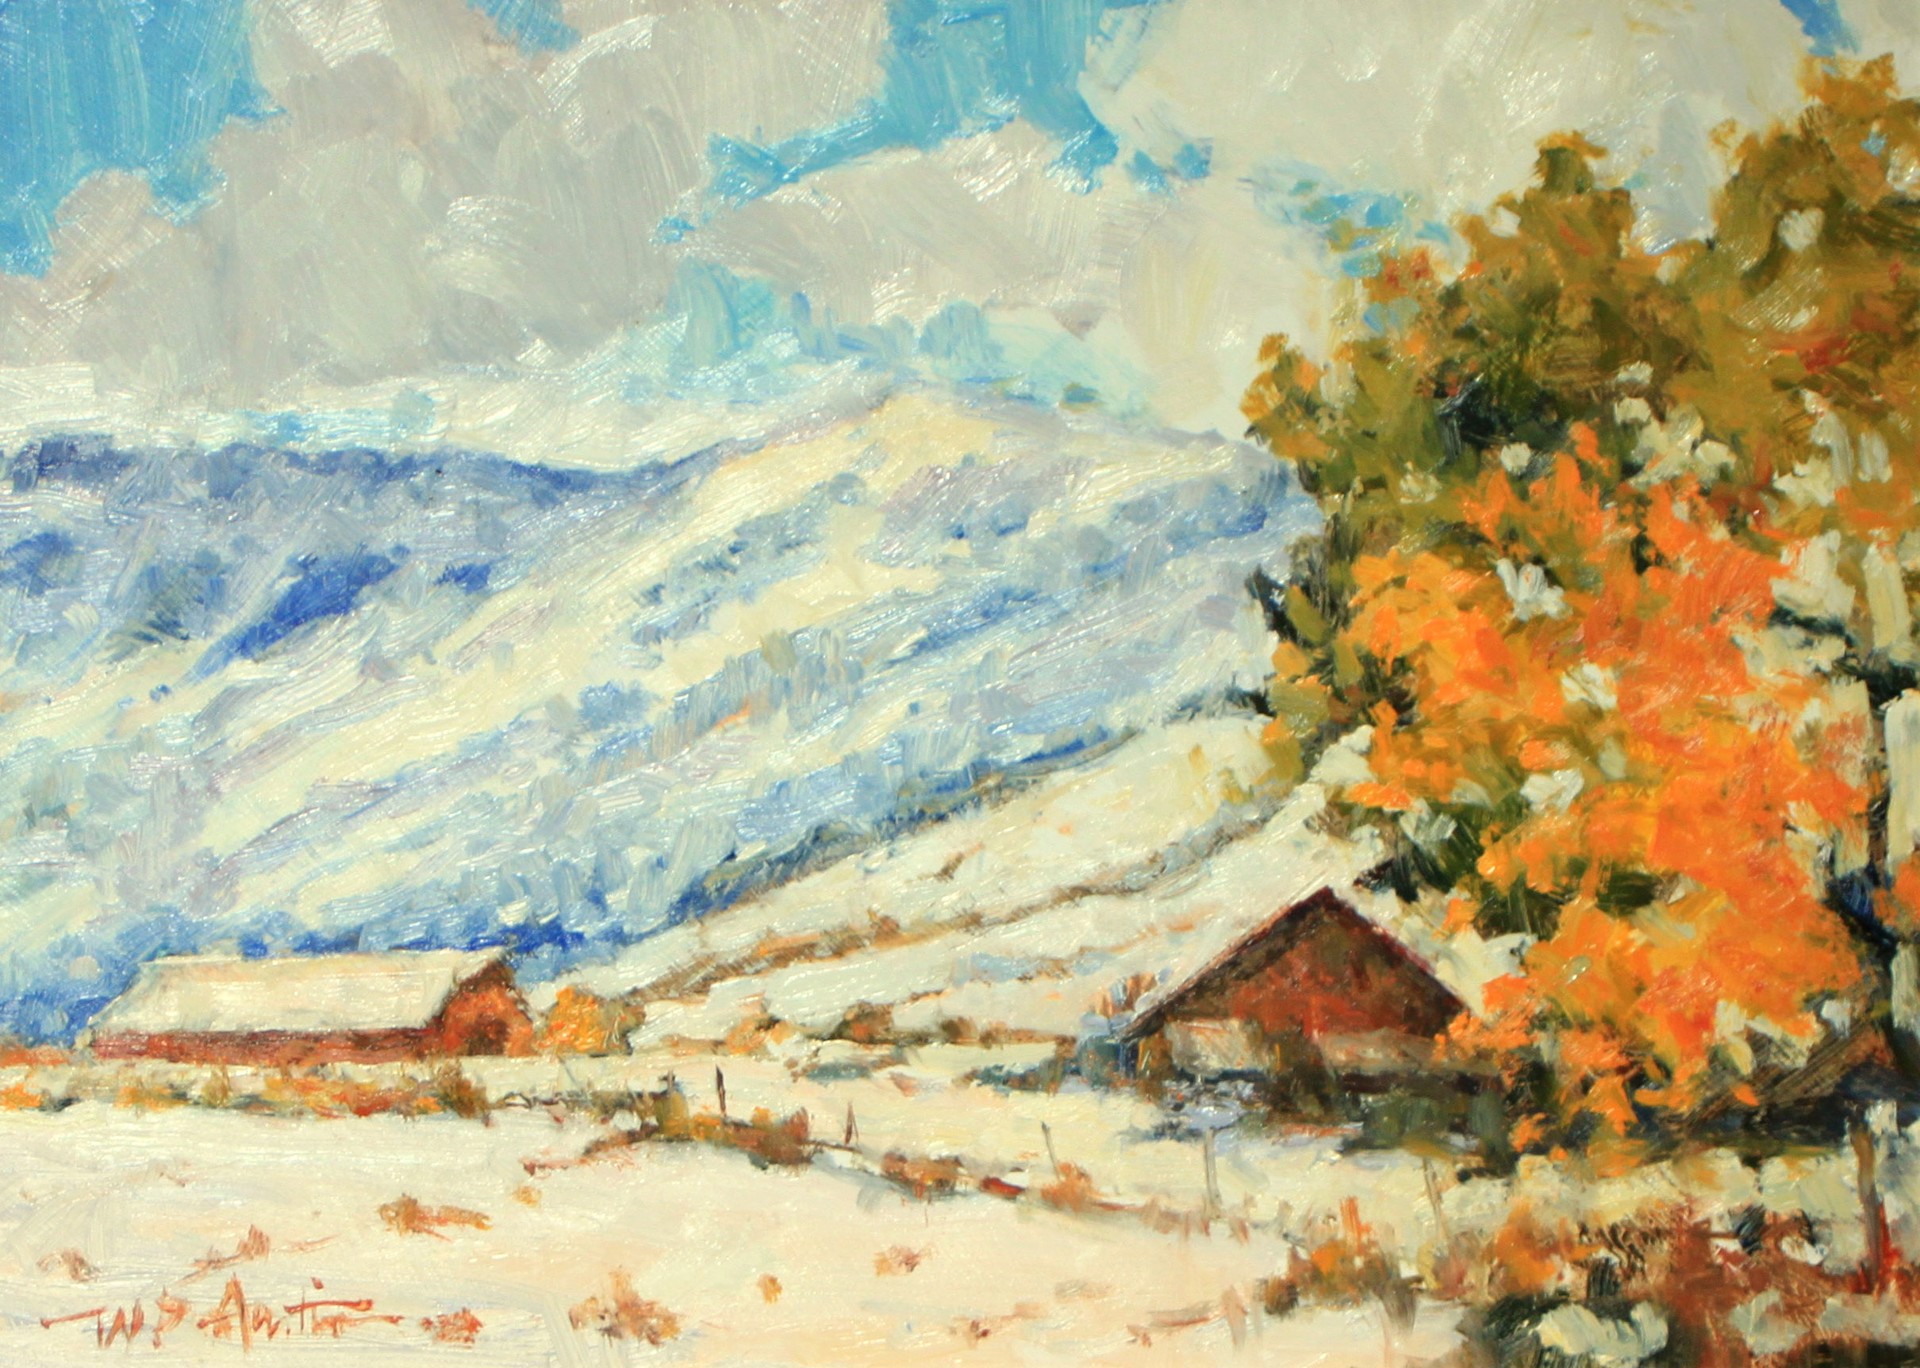 Salt River Ranch by Perry Austin